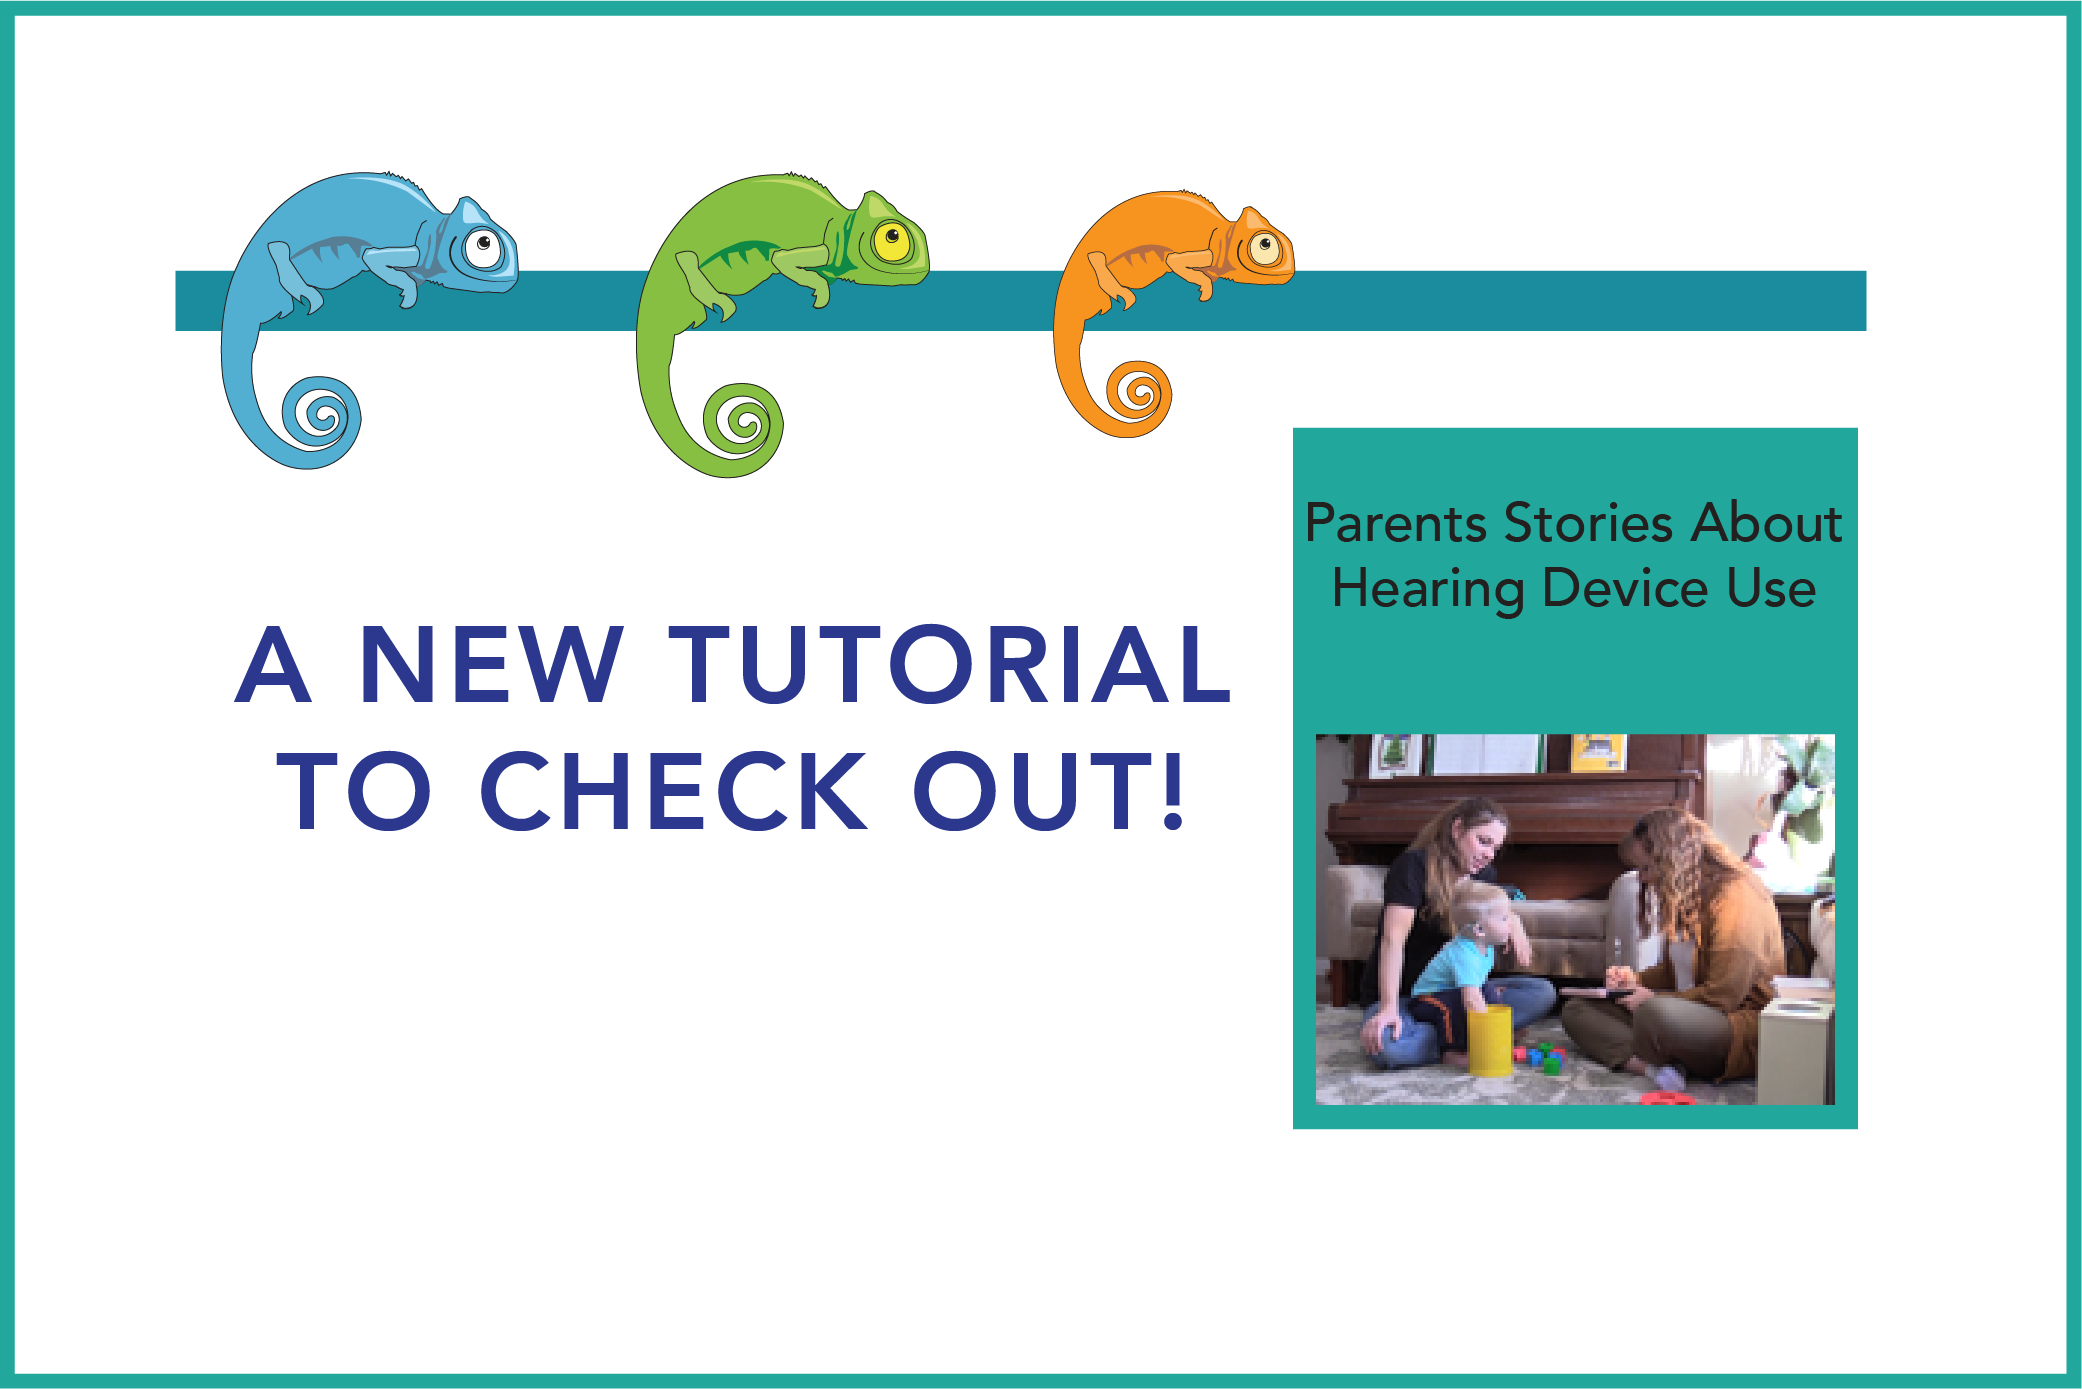 New Tutorials to Check Out! Parents Stories About Hearing Device Use